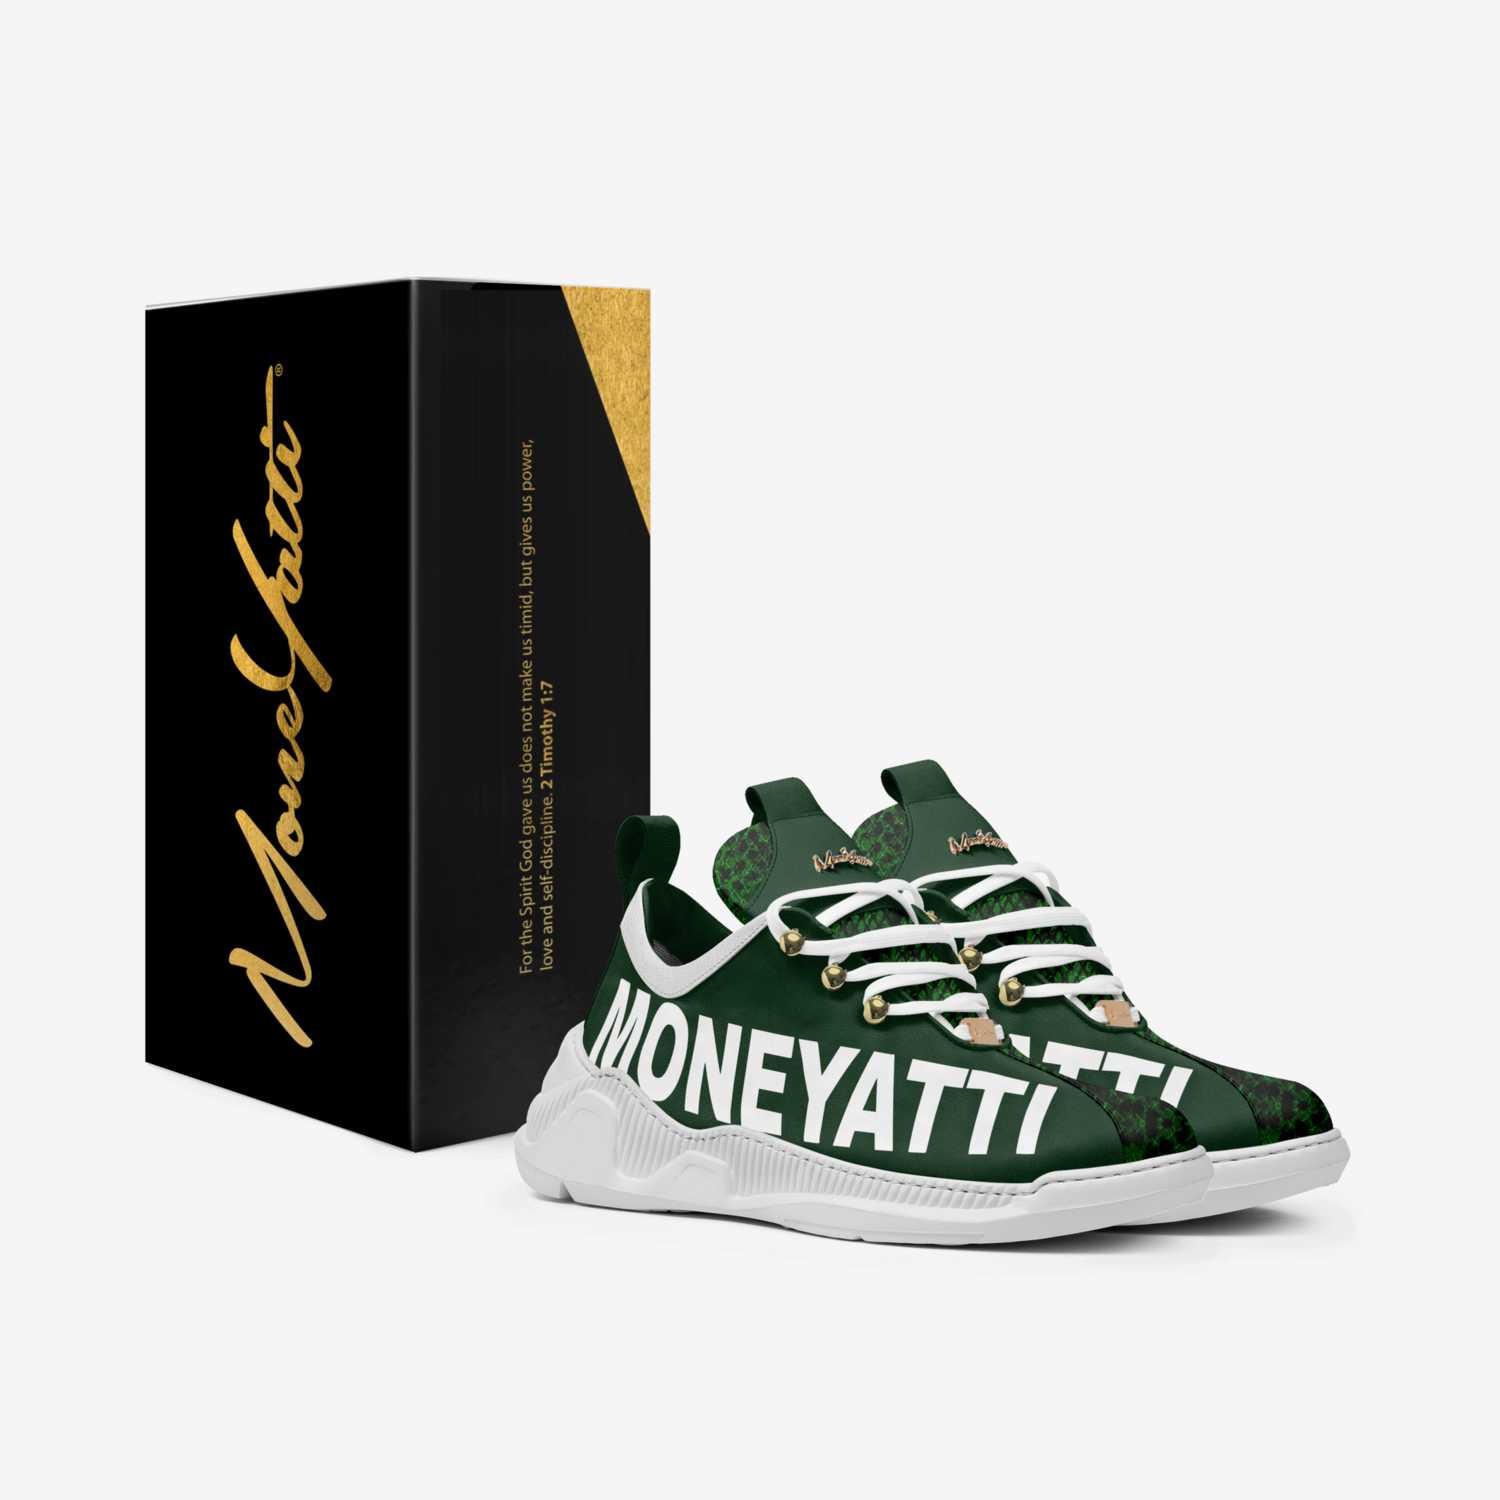 SIG23 custom made in Italy shoes by Moneyatti Brand | Box view